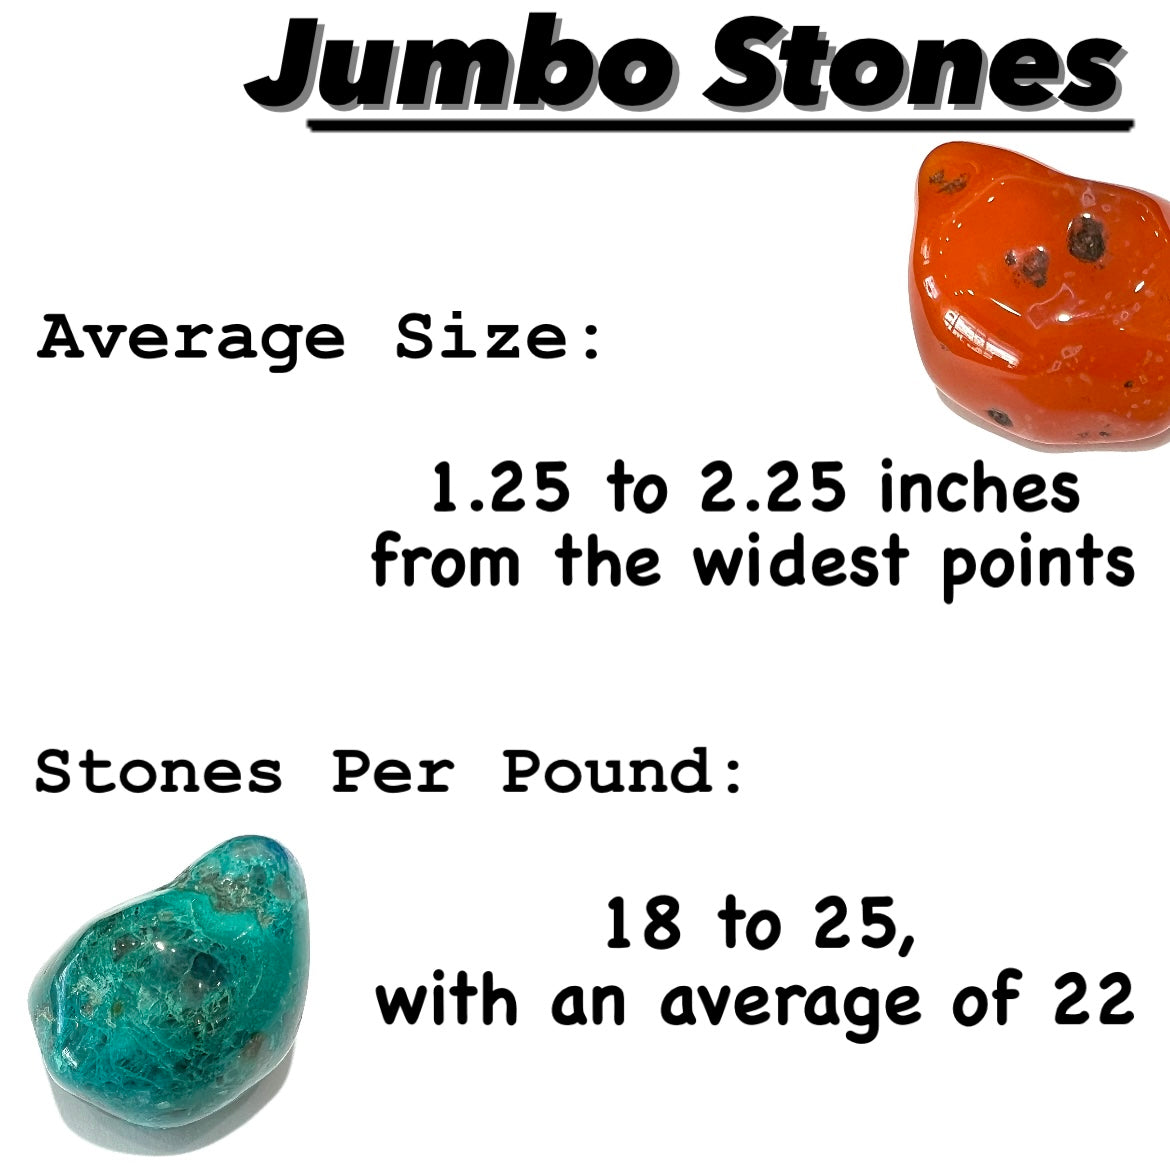 A sign reading: "Jumbo Stones.  Average size: 1.25 to 2.25 inches from the widest points.  Stones per pound: 18 to 25, with an average of 22."